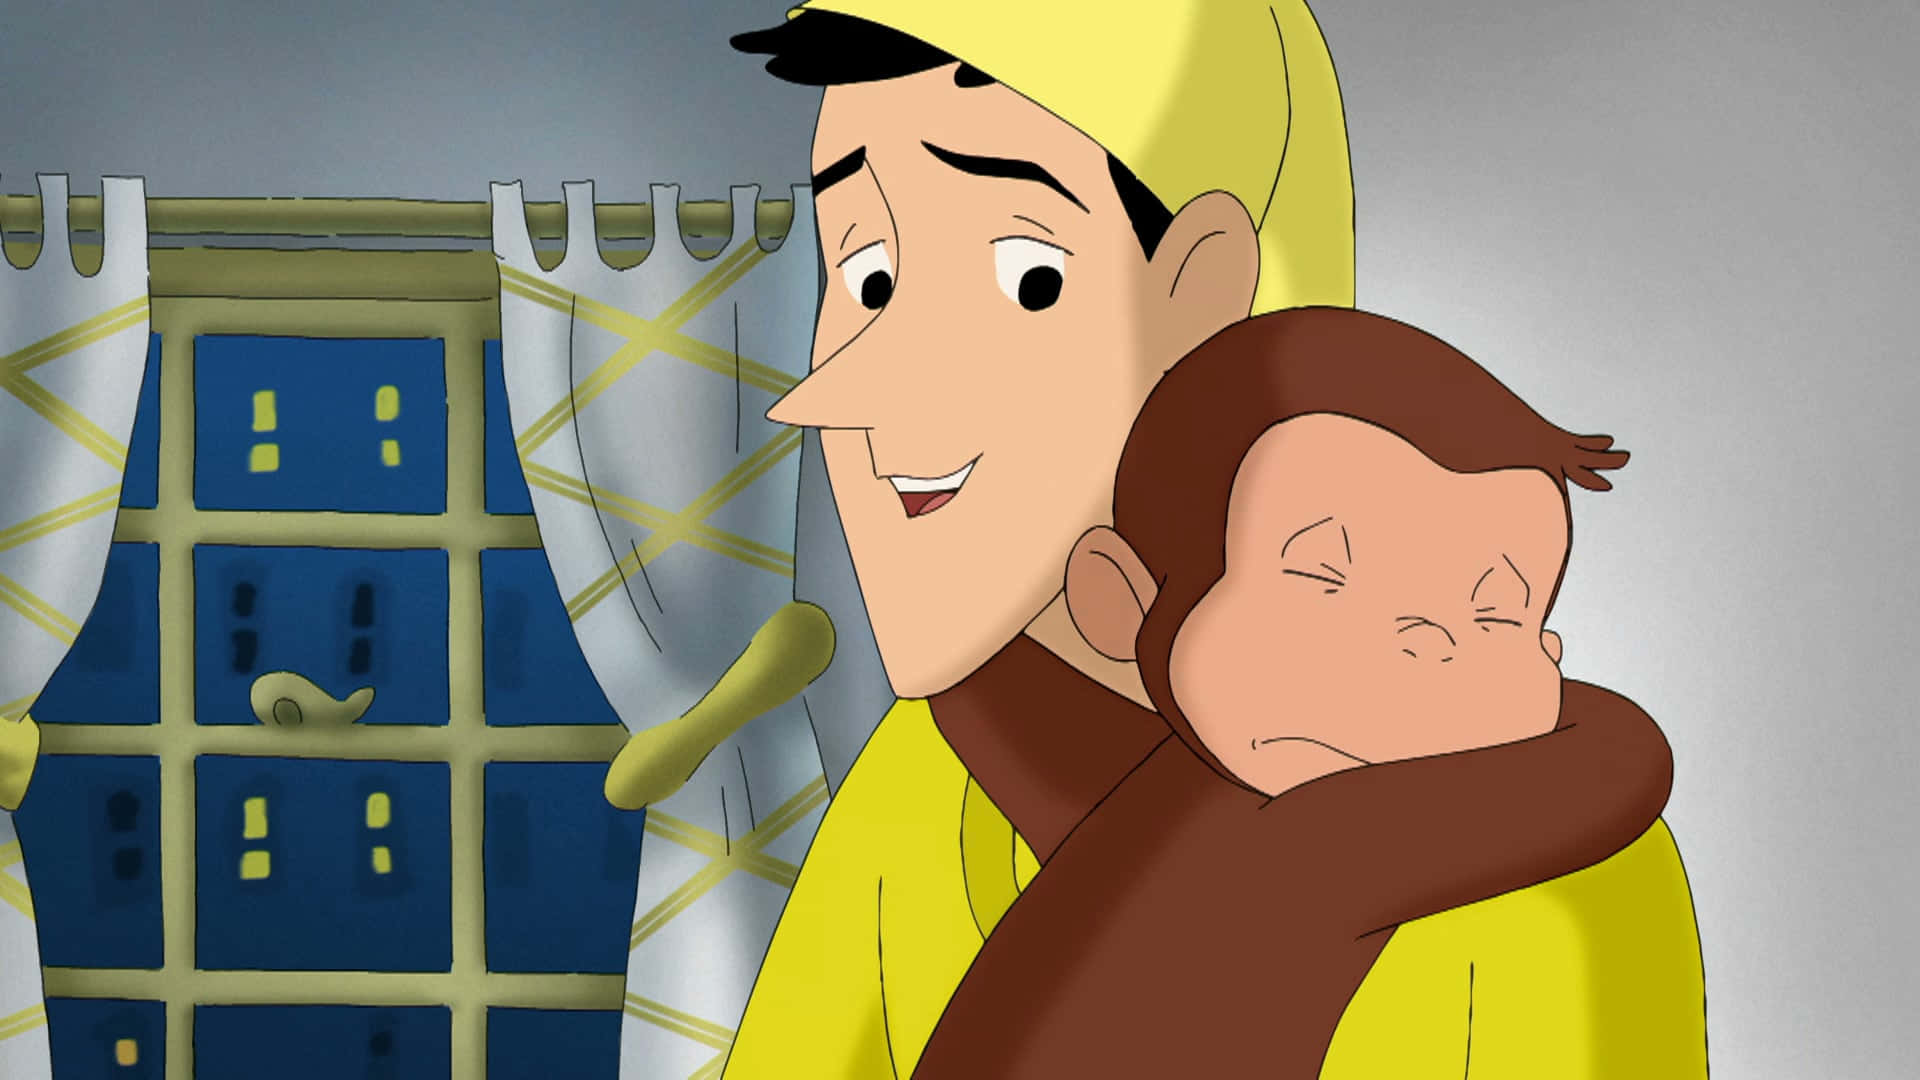 "Adventuring with Curious George"